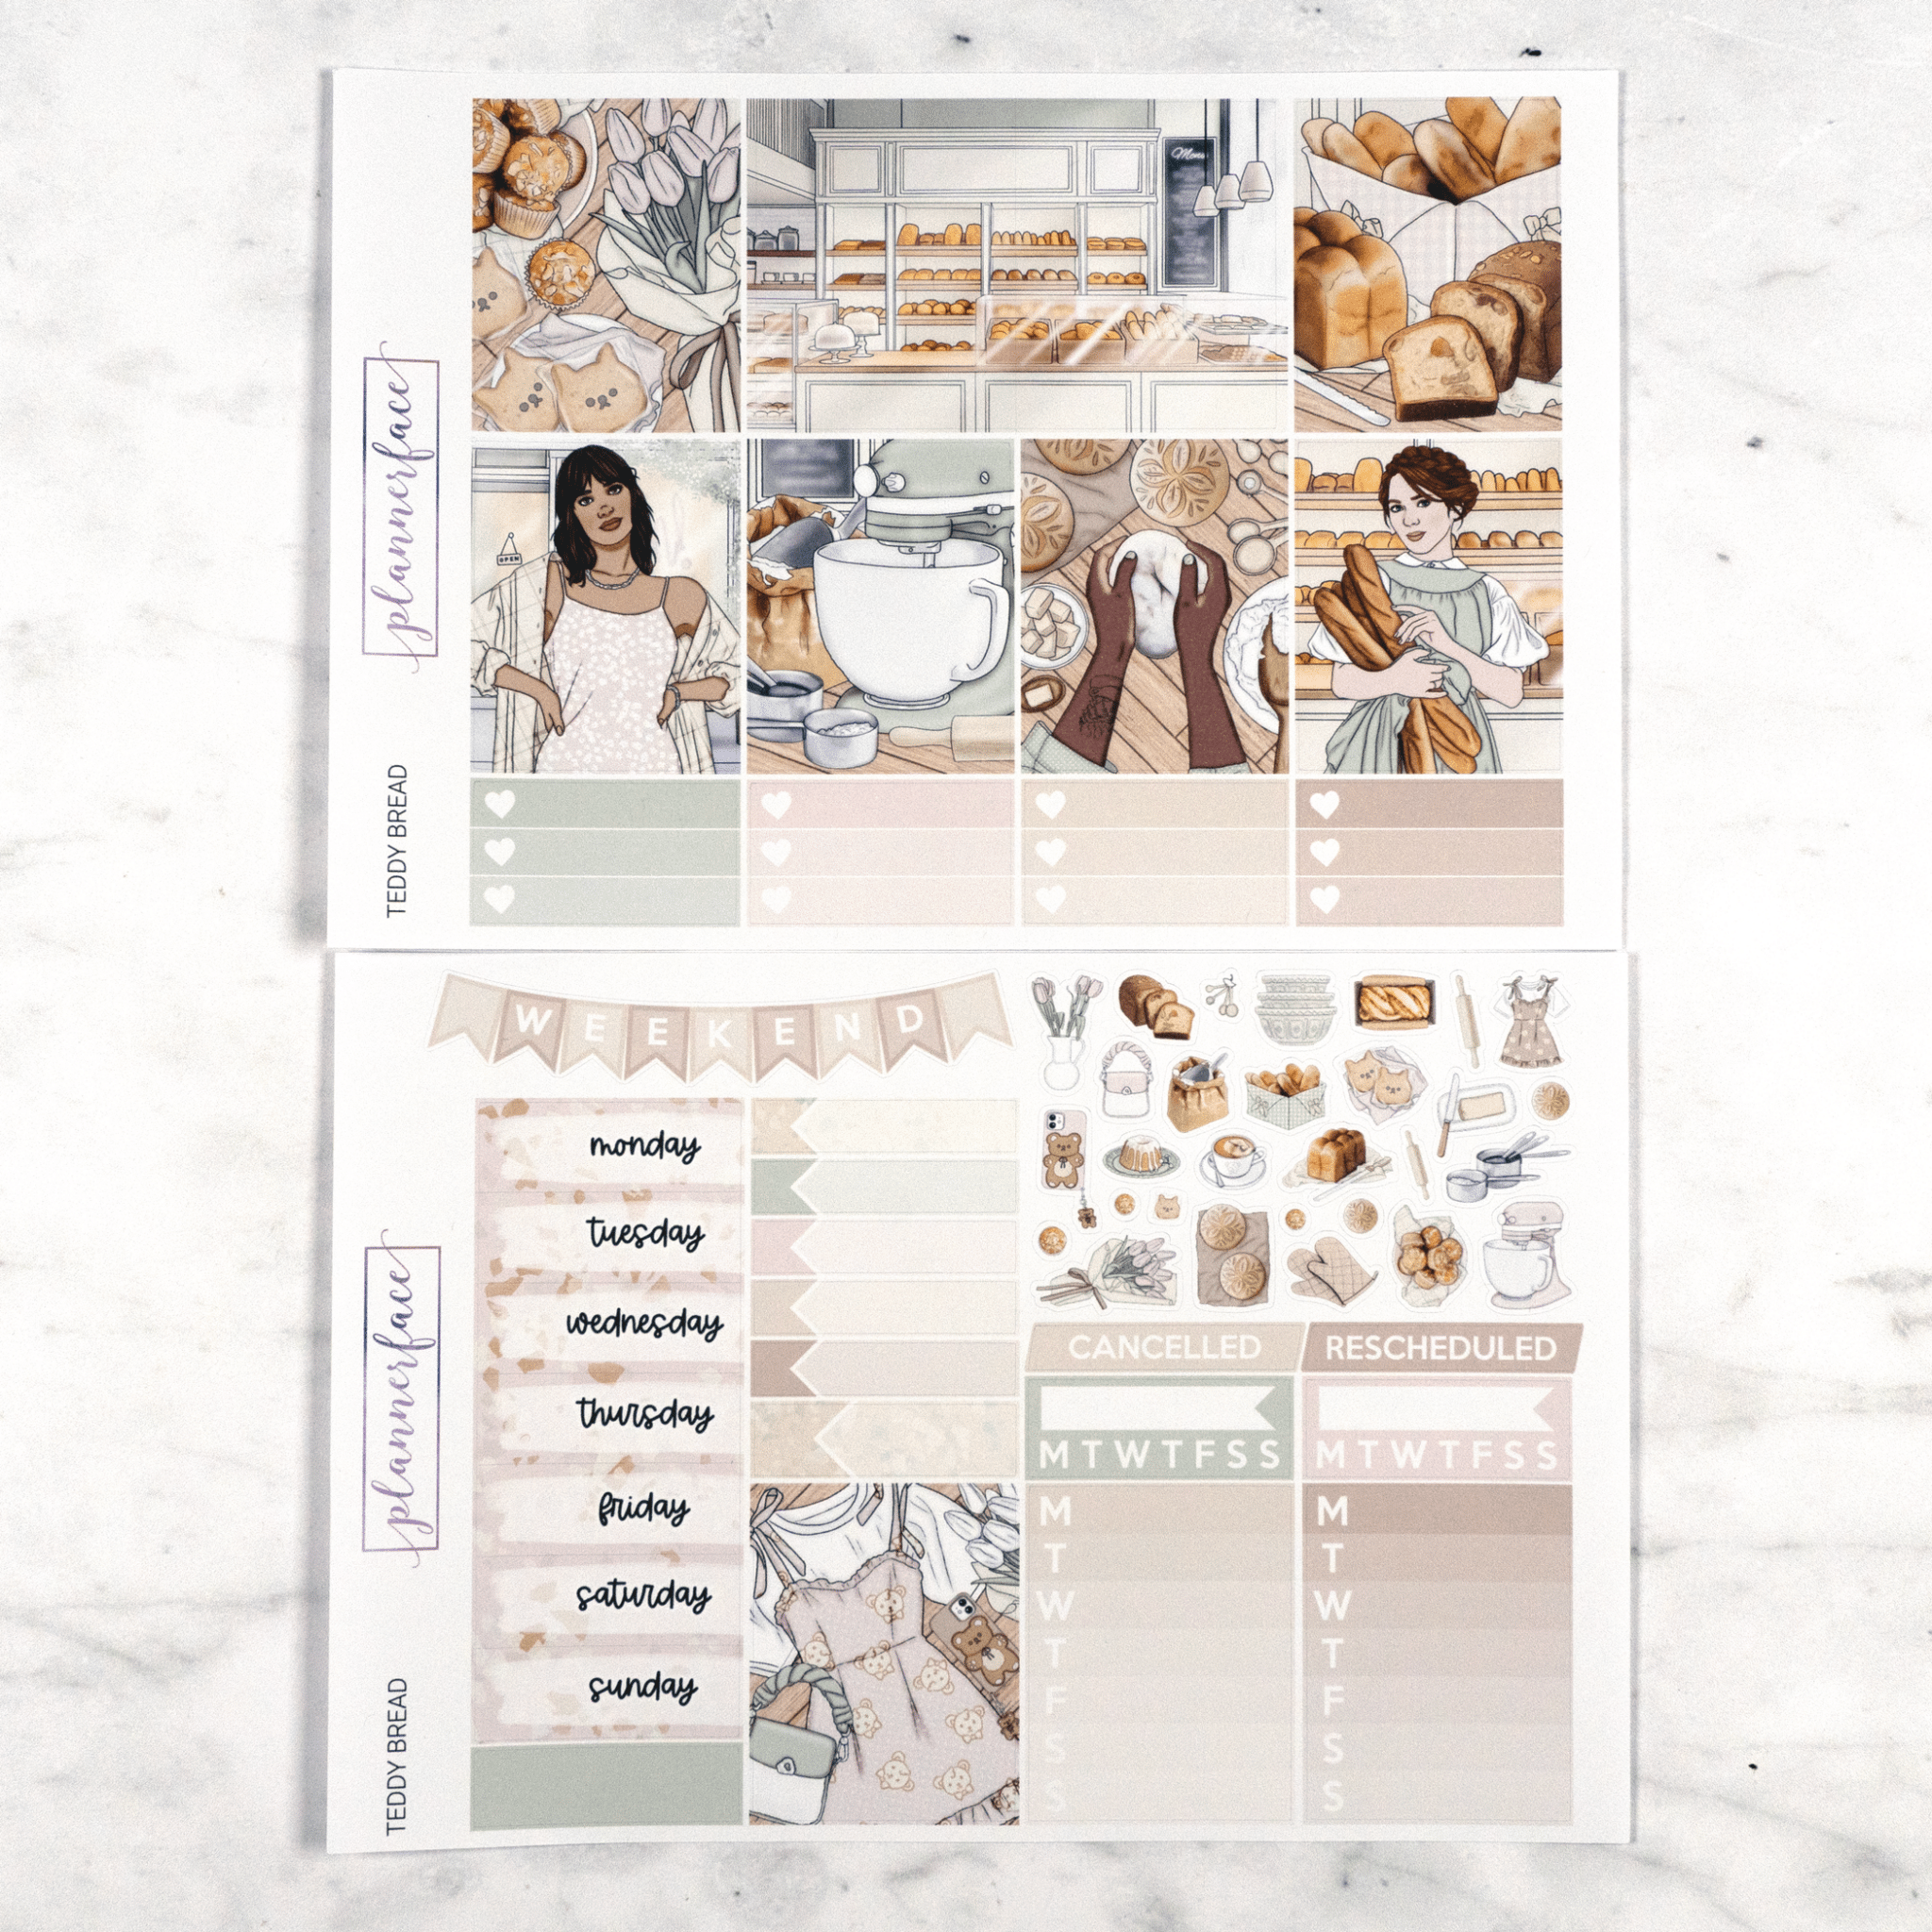 Teddy Bread Weekly Kit by Plannerface